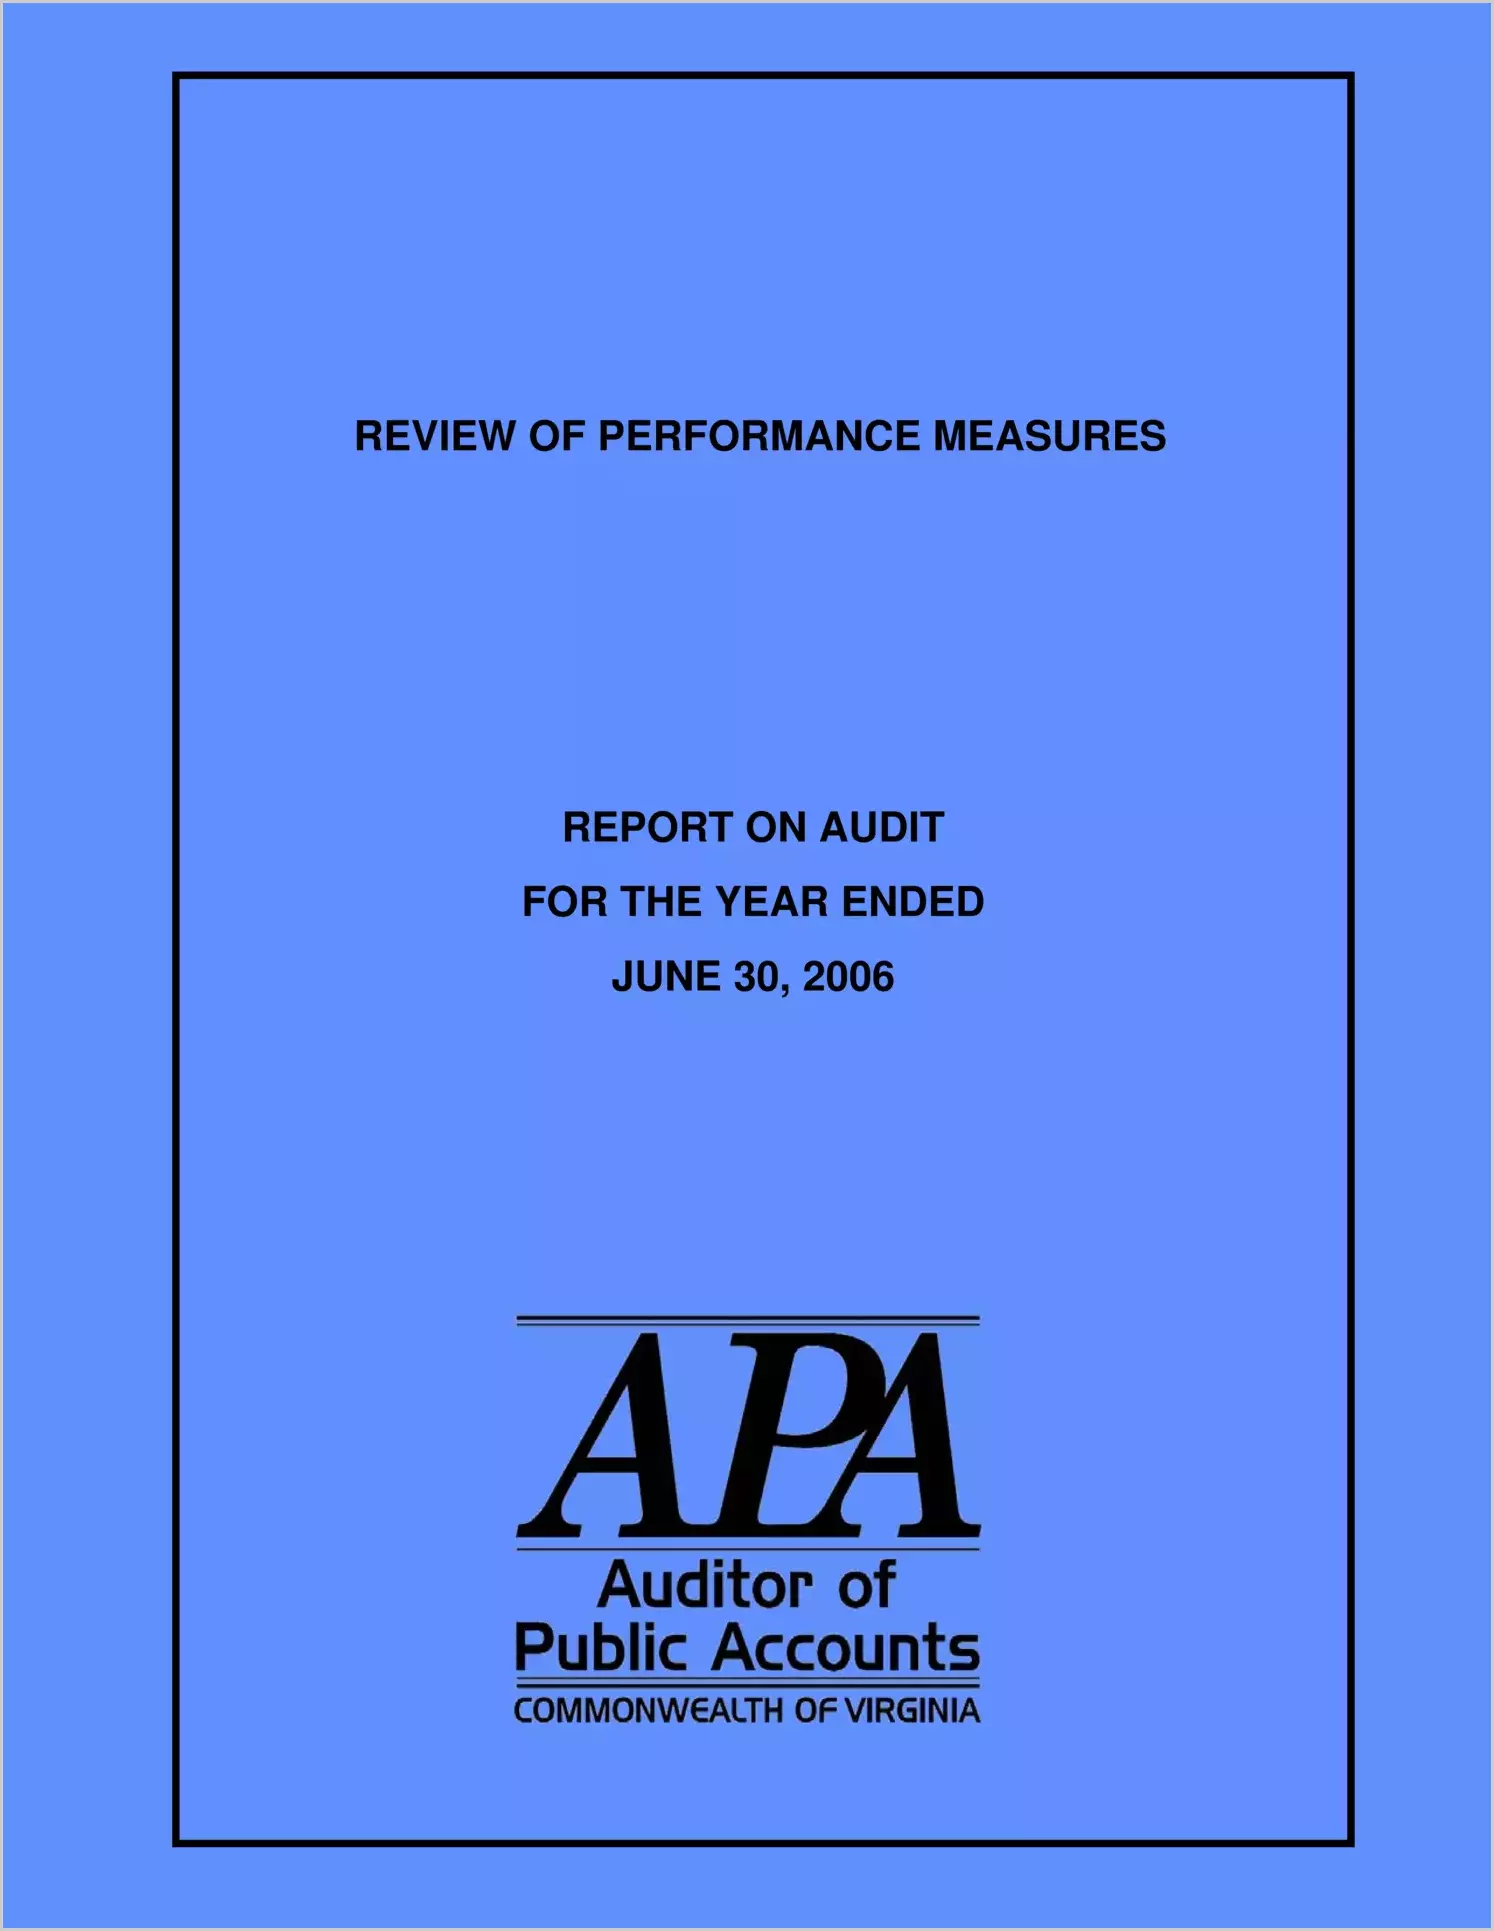 Review of Performance Measures for fiscal year ended June 30, 2006